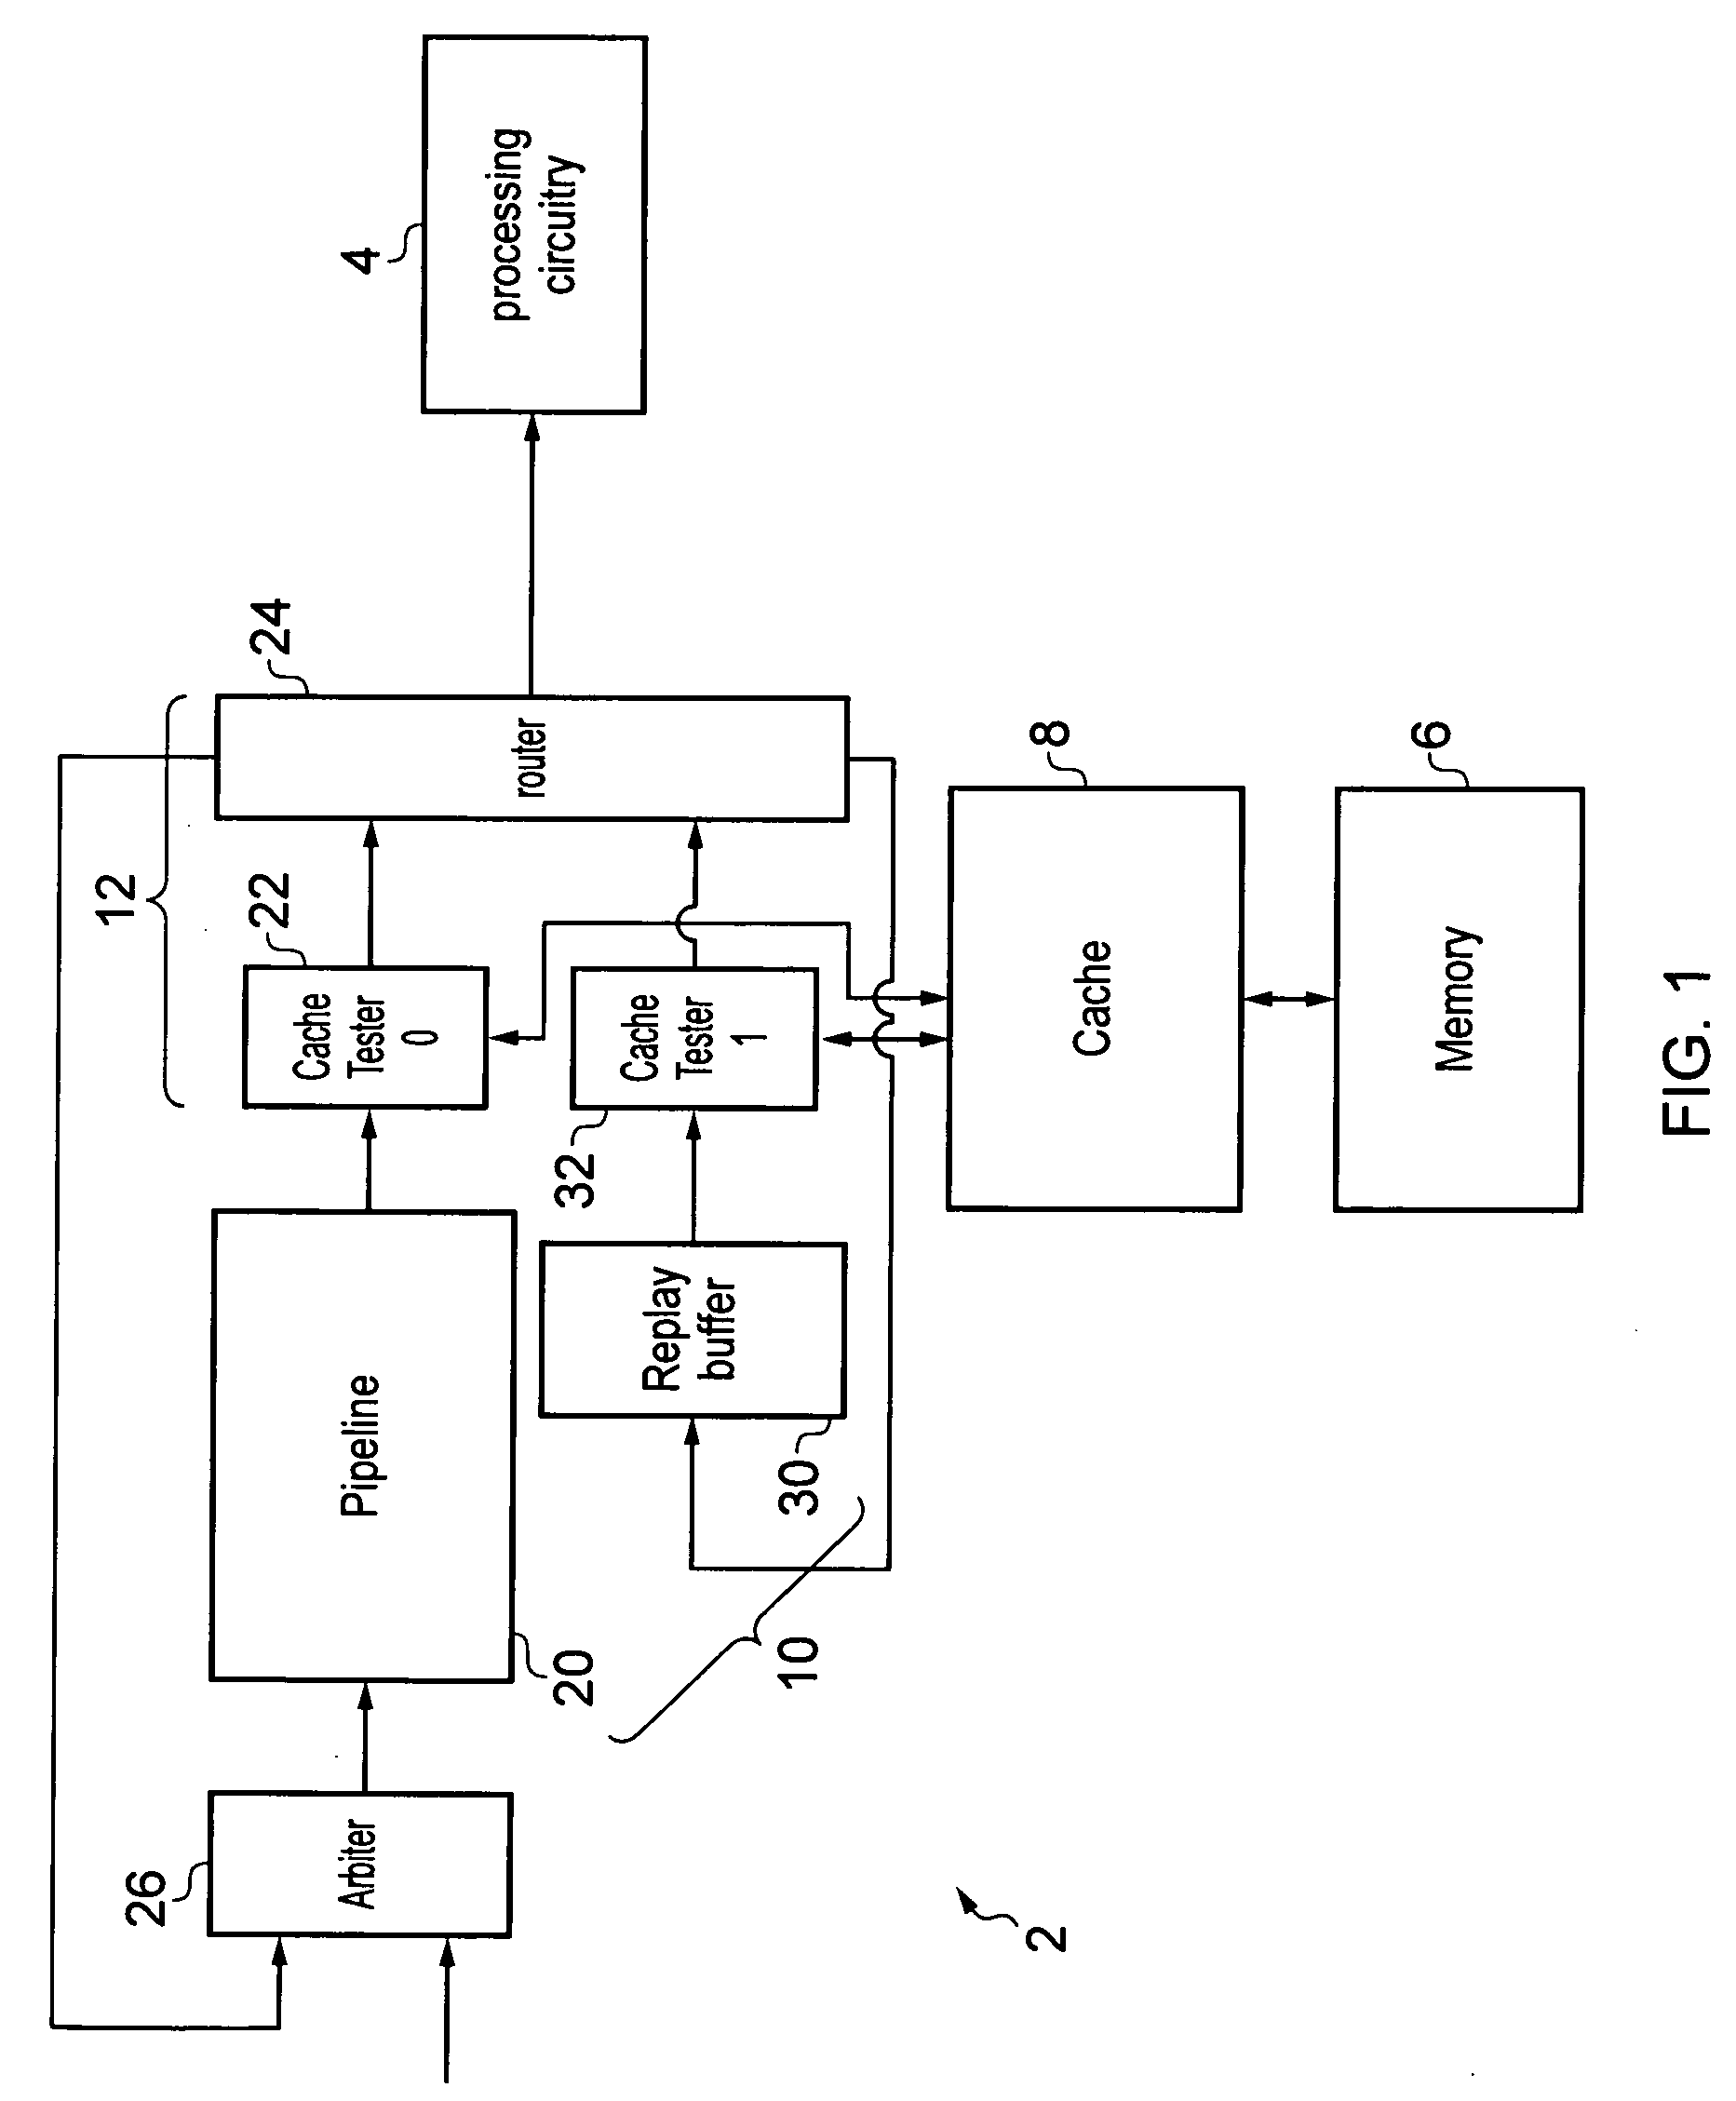 Apparatus and method for processing threads requiring resources